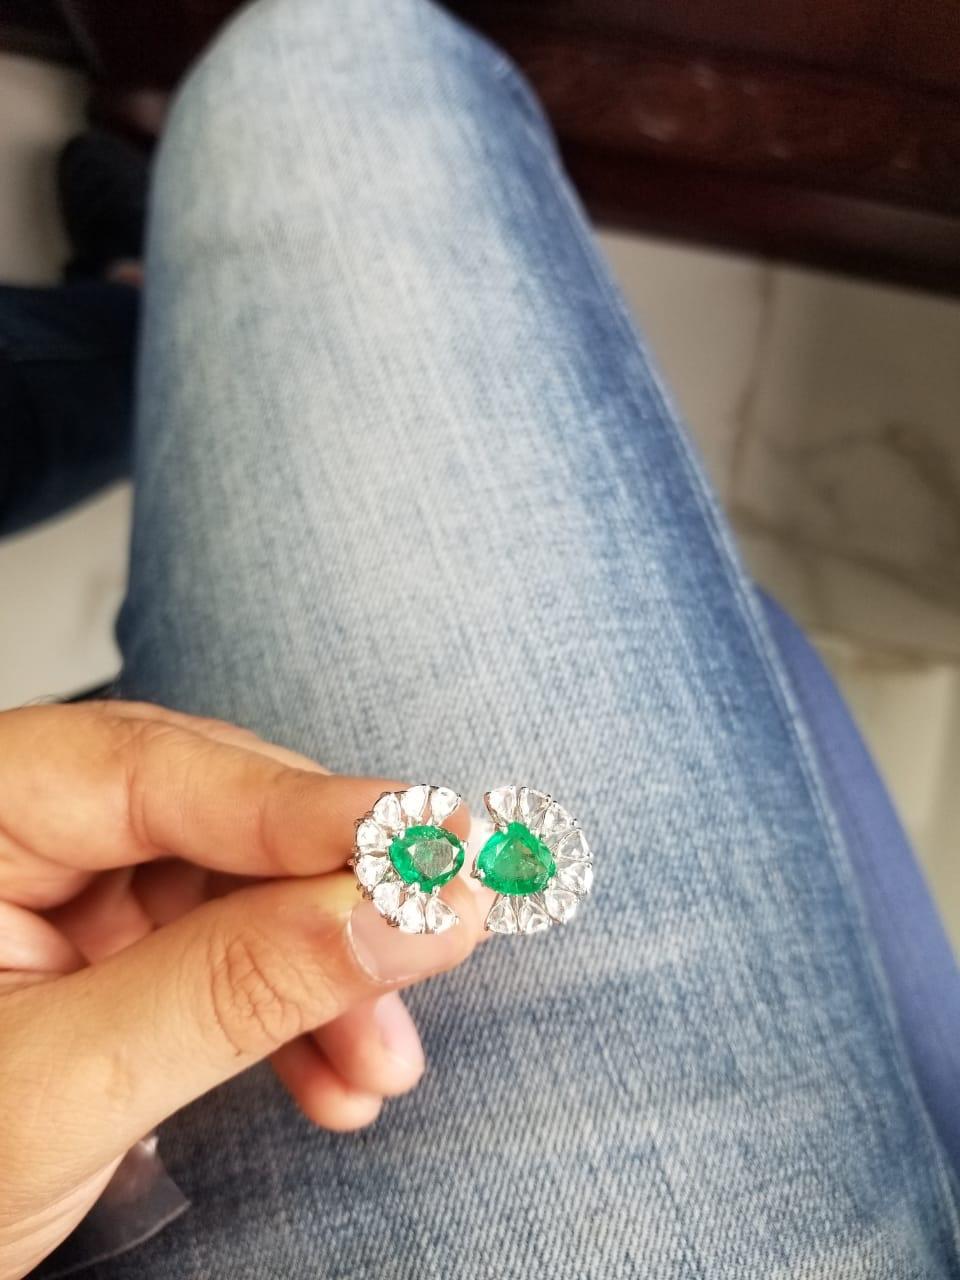 A very chic Zambian Emerald & Rose Cut Diamonds Two - Finger Cocktail Ring Set in 18K white gold. The weight of the Emeralds is 4.05 carats. The weight of the Diamonds is 1.75 carats. The ring is made in Indian ring size 12 (US size 6), and can be